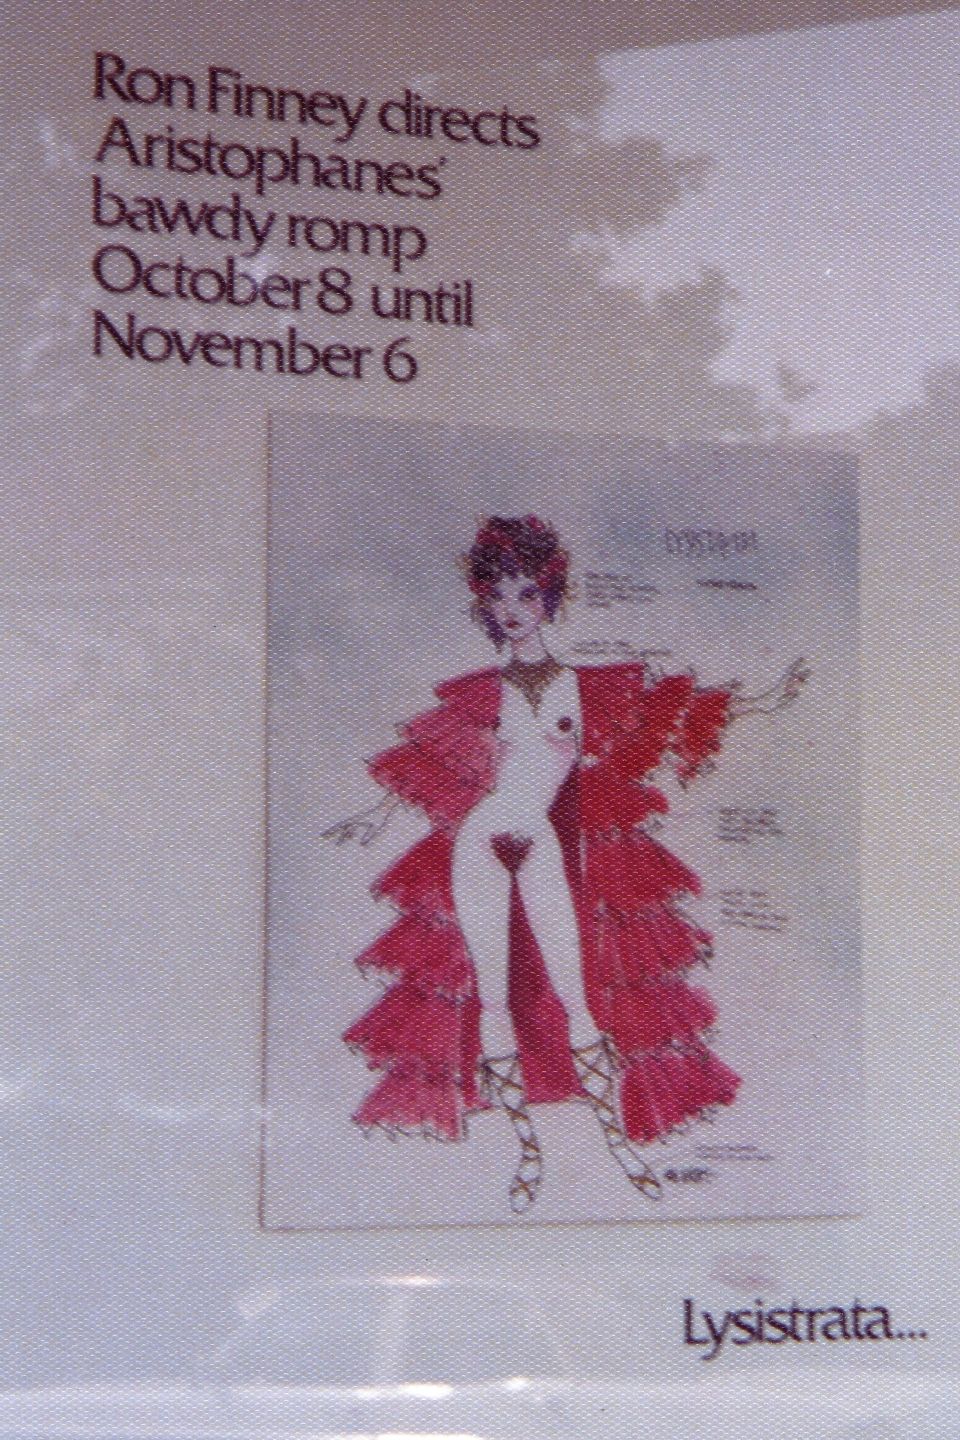 Lysistrata poster, costumes designed by Max Hurley.